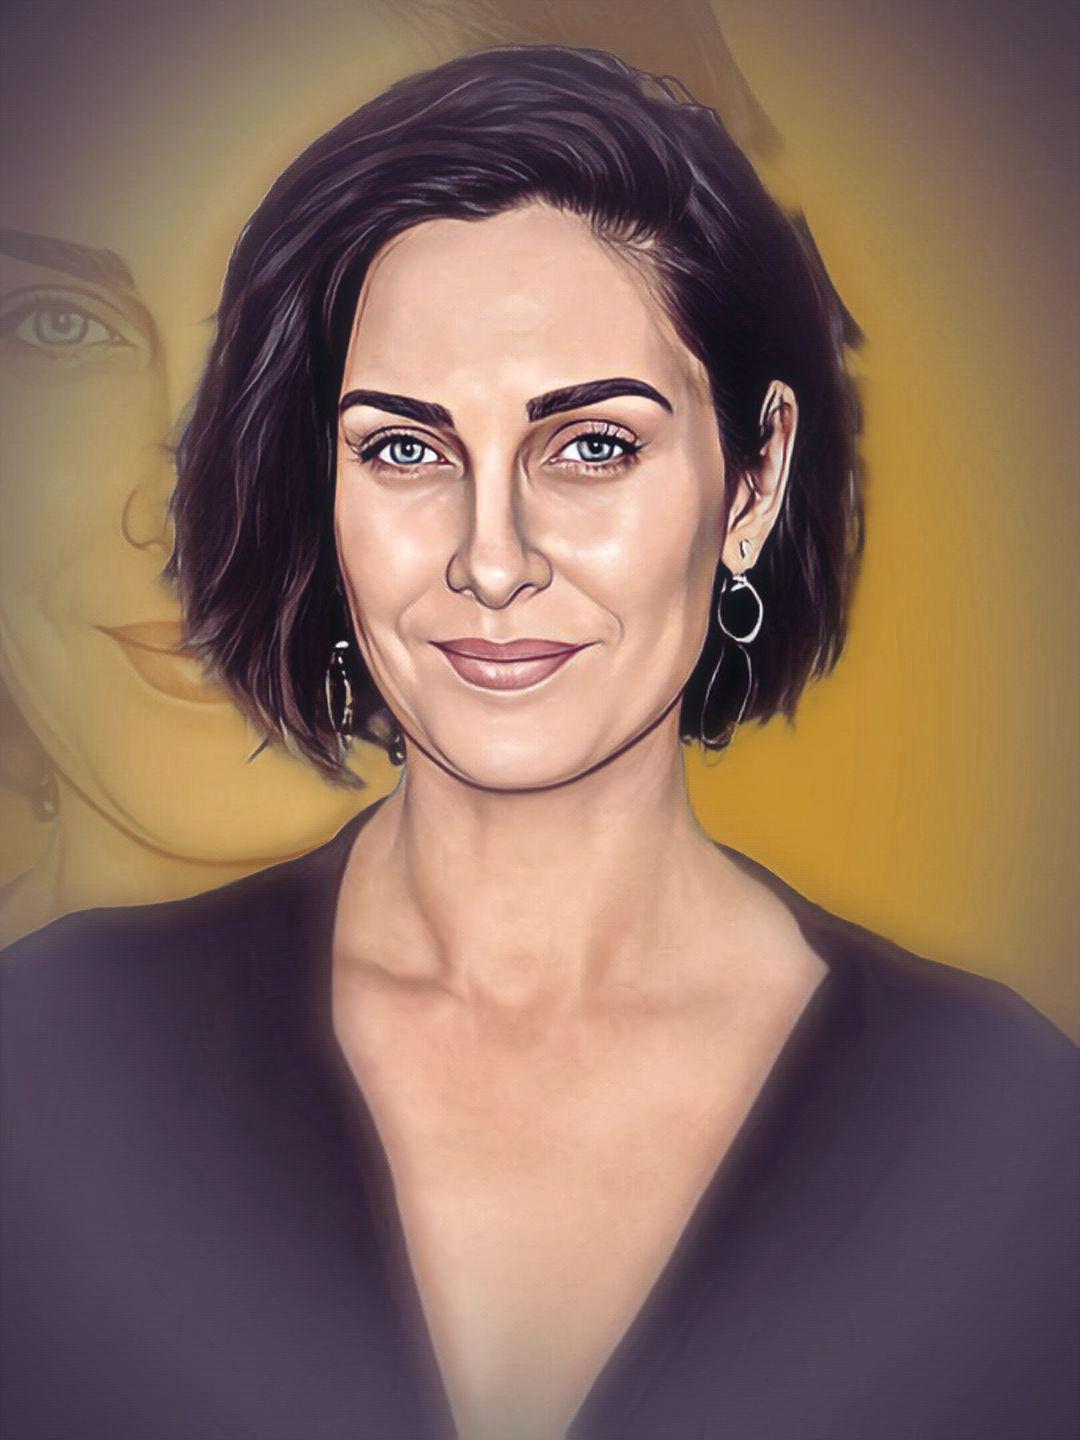 Amateur Teen Webcam Squirt - Carrie-Anne Moss - Celeb ART - Beautiful Artworks of Celebrities,  Footballers, Politicians and Famous People in World | OpenSea